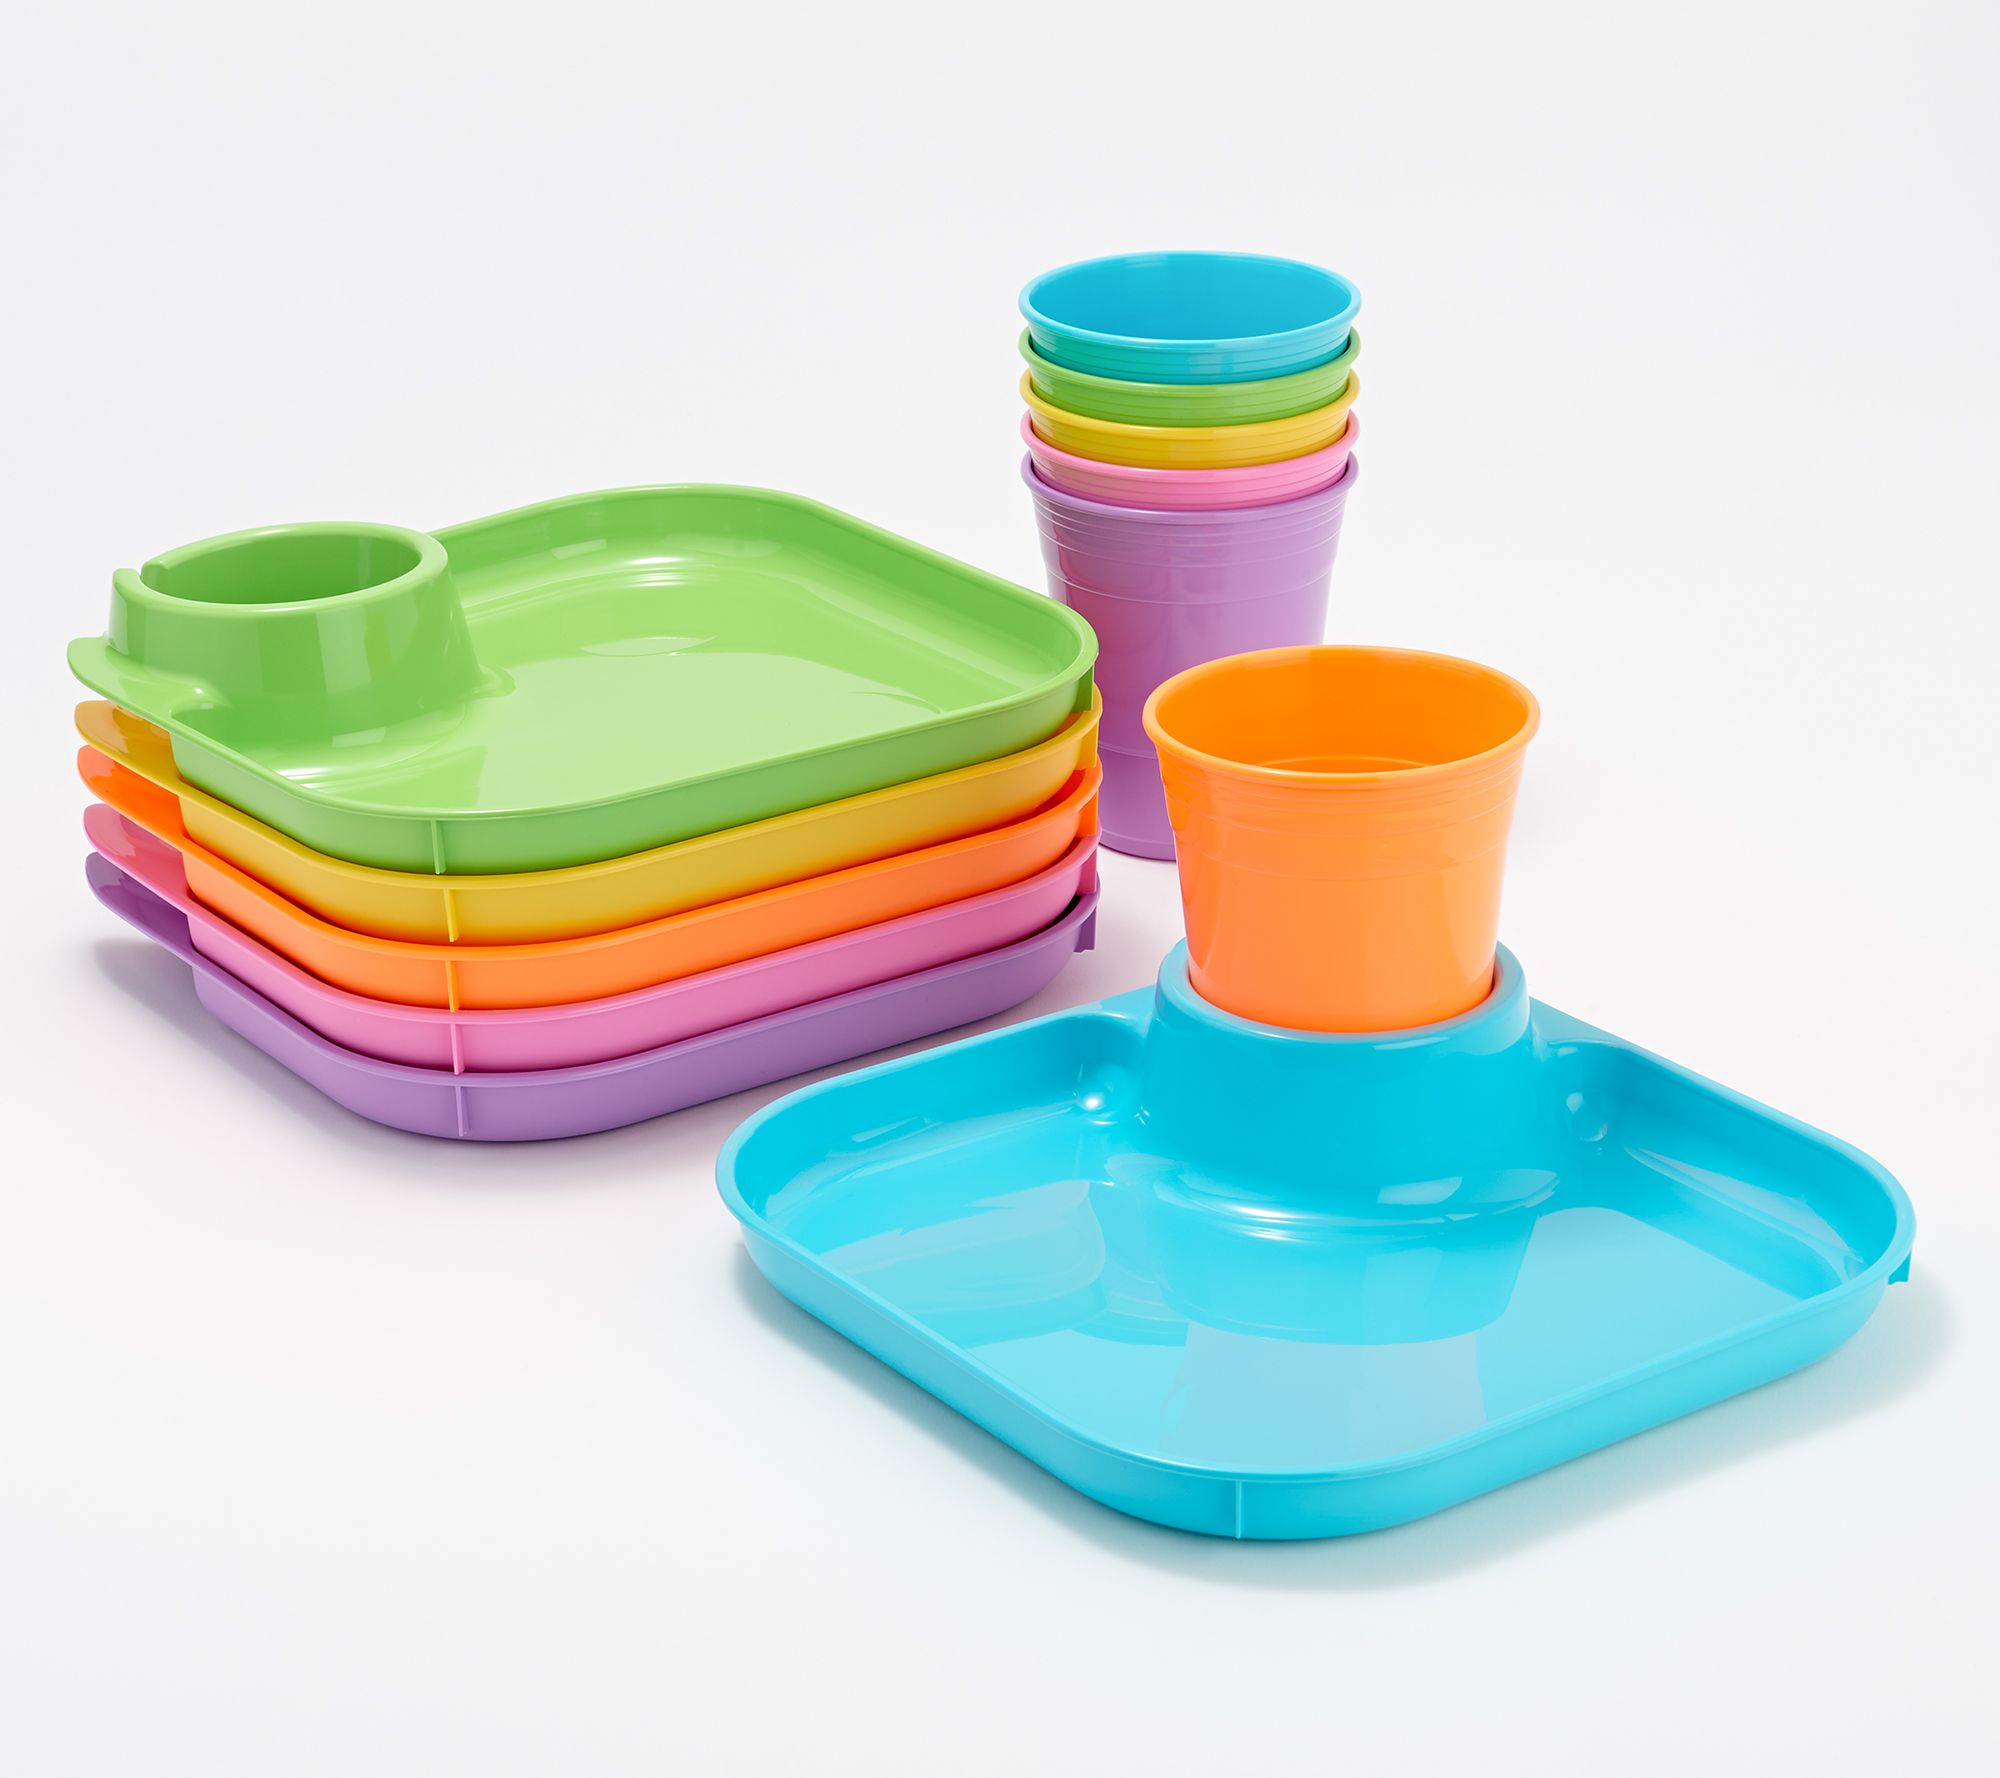 Great Plate 12-Piece Square Food and Beverage Serving Set - QVC.com